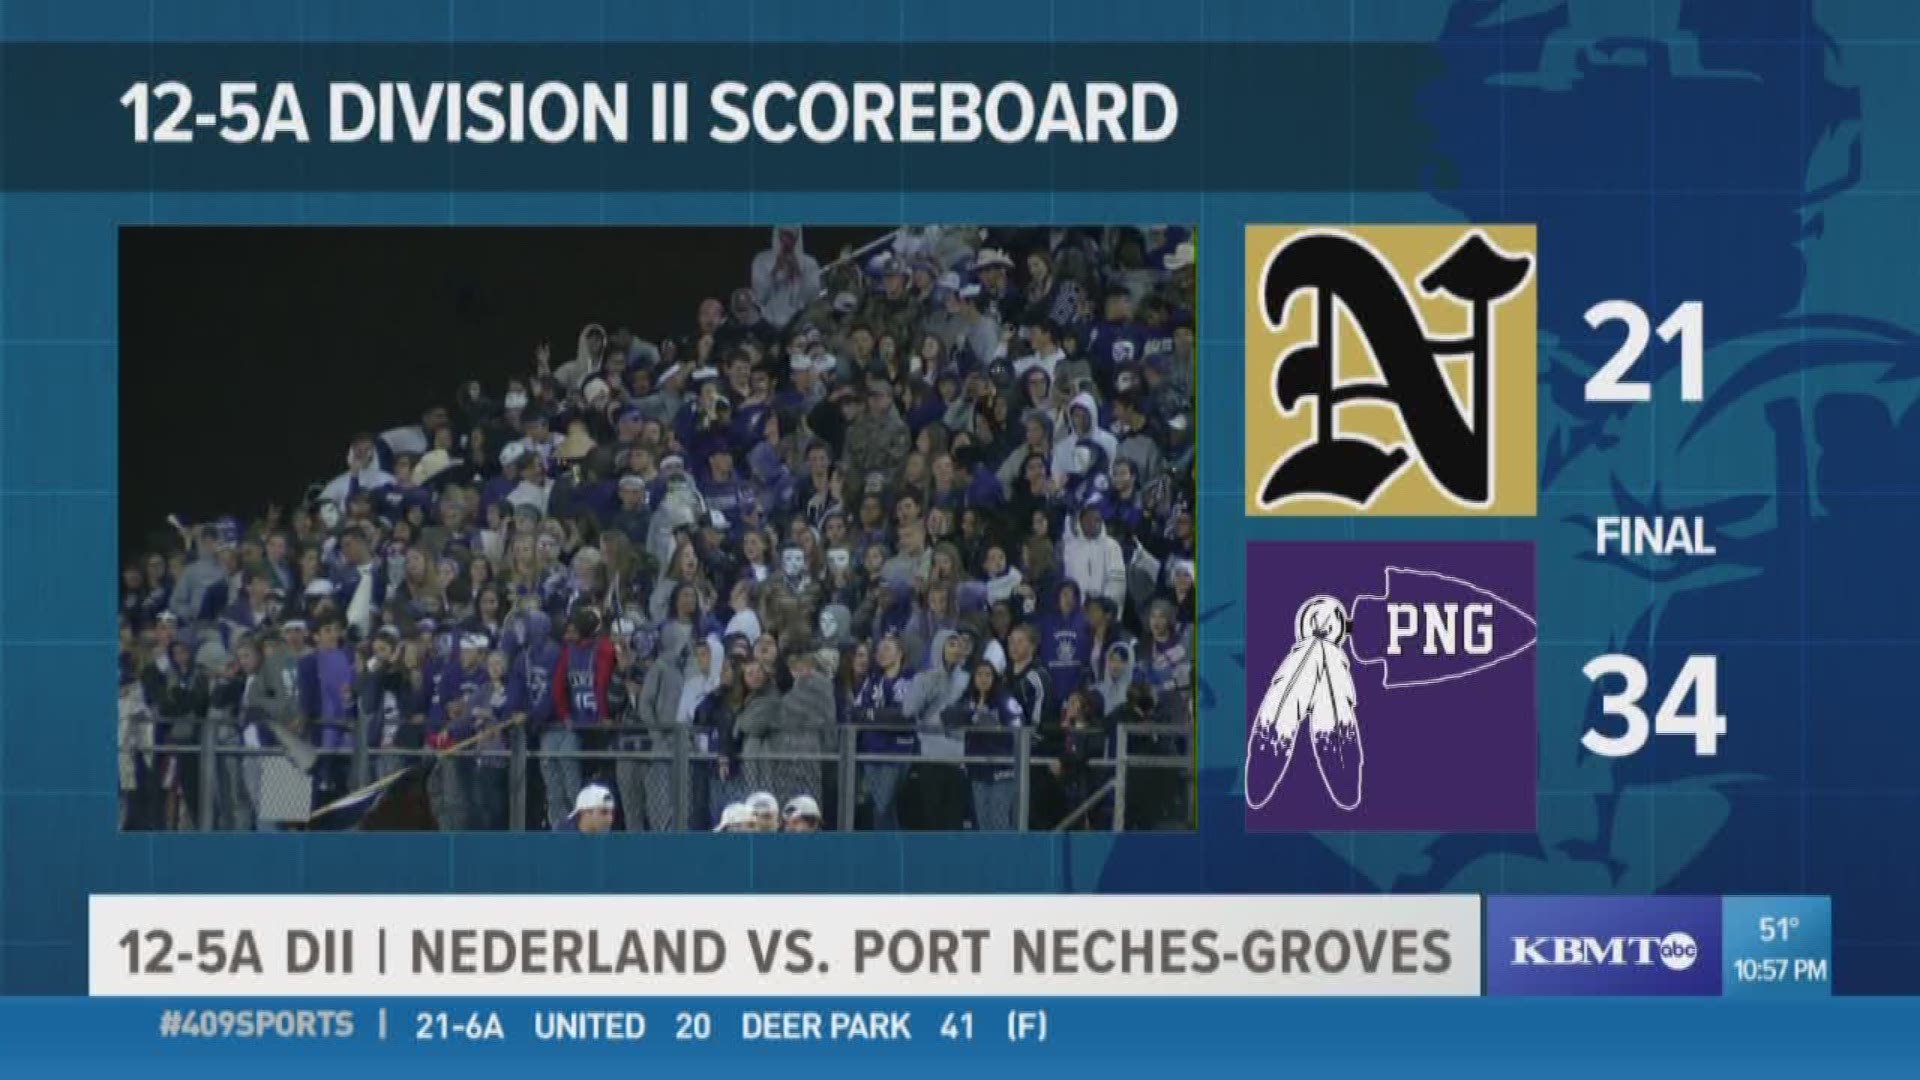 409Sports takes a second look at Port Neches-Groves High's Game of the Week win over Nederland 34 - 21